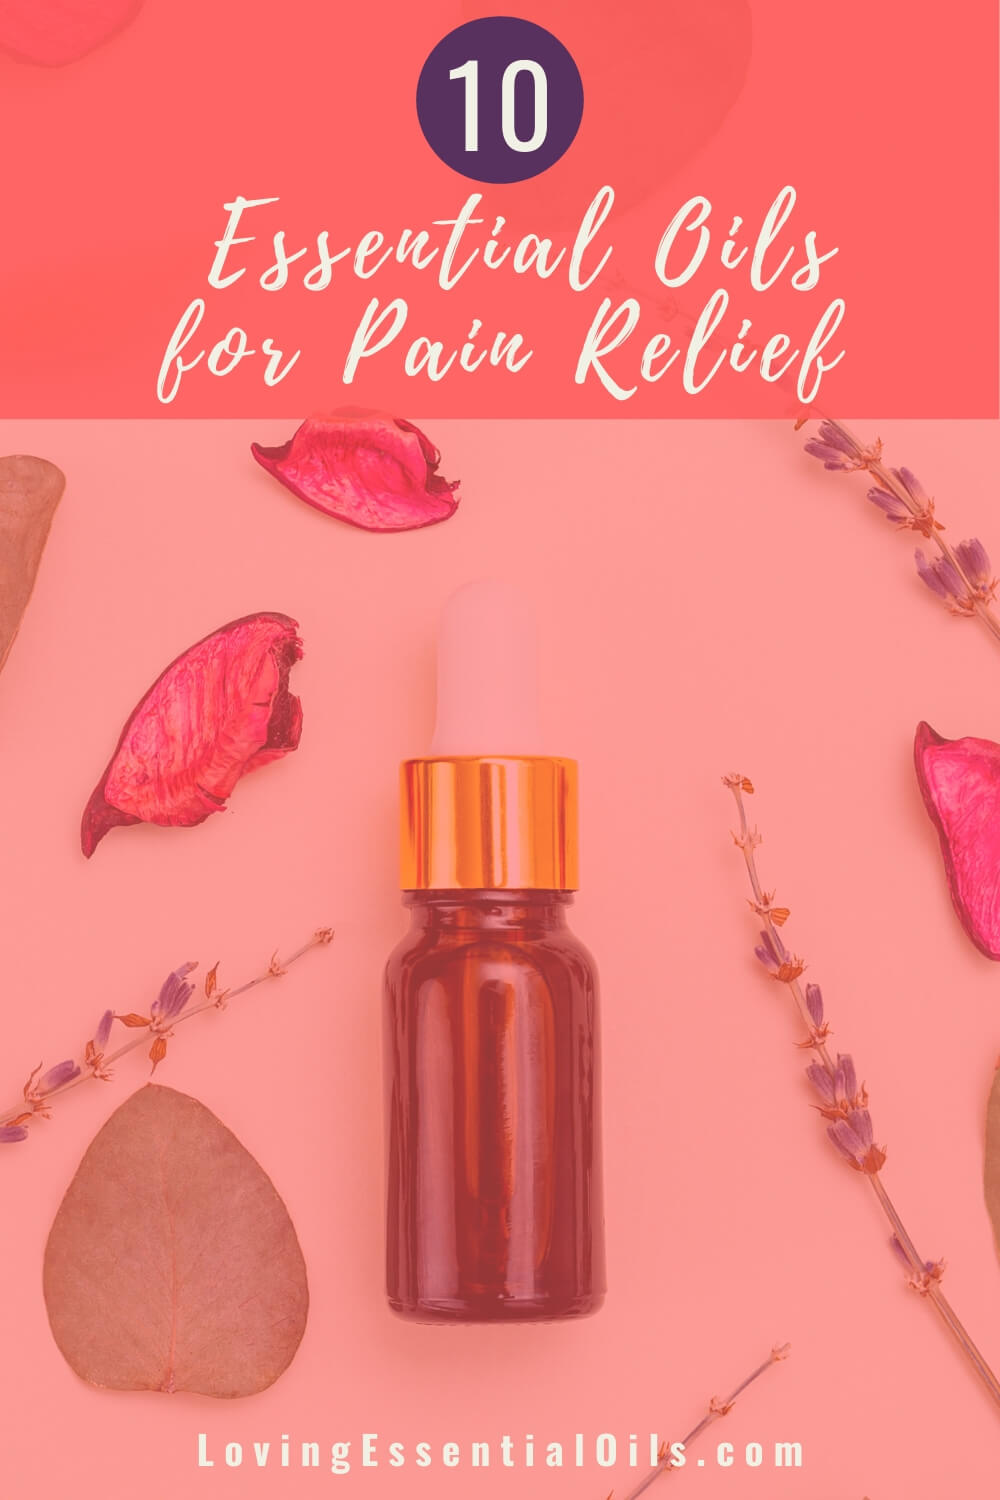 Can Essential Oil Help With Pain Relief? 